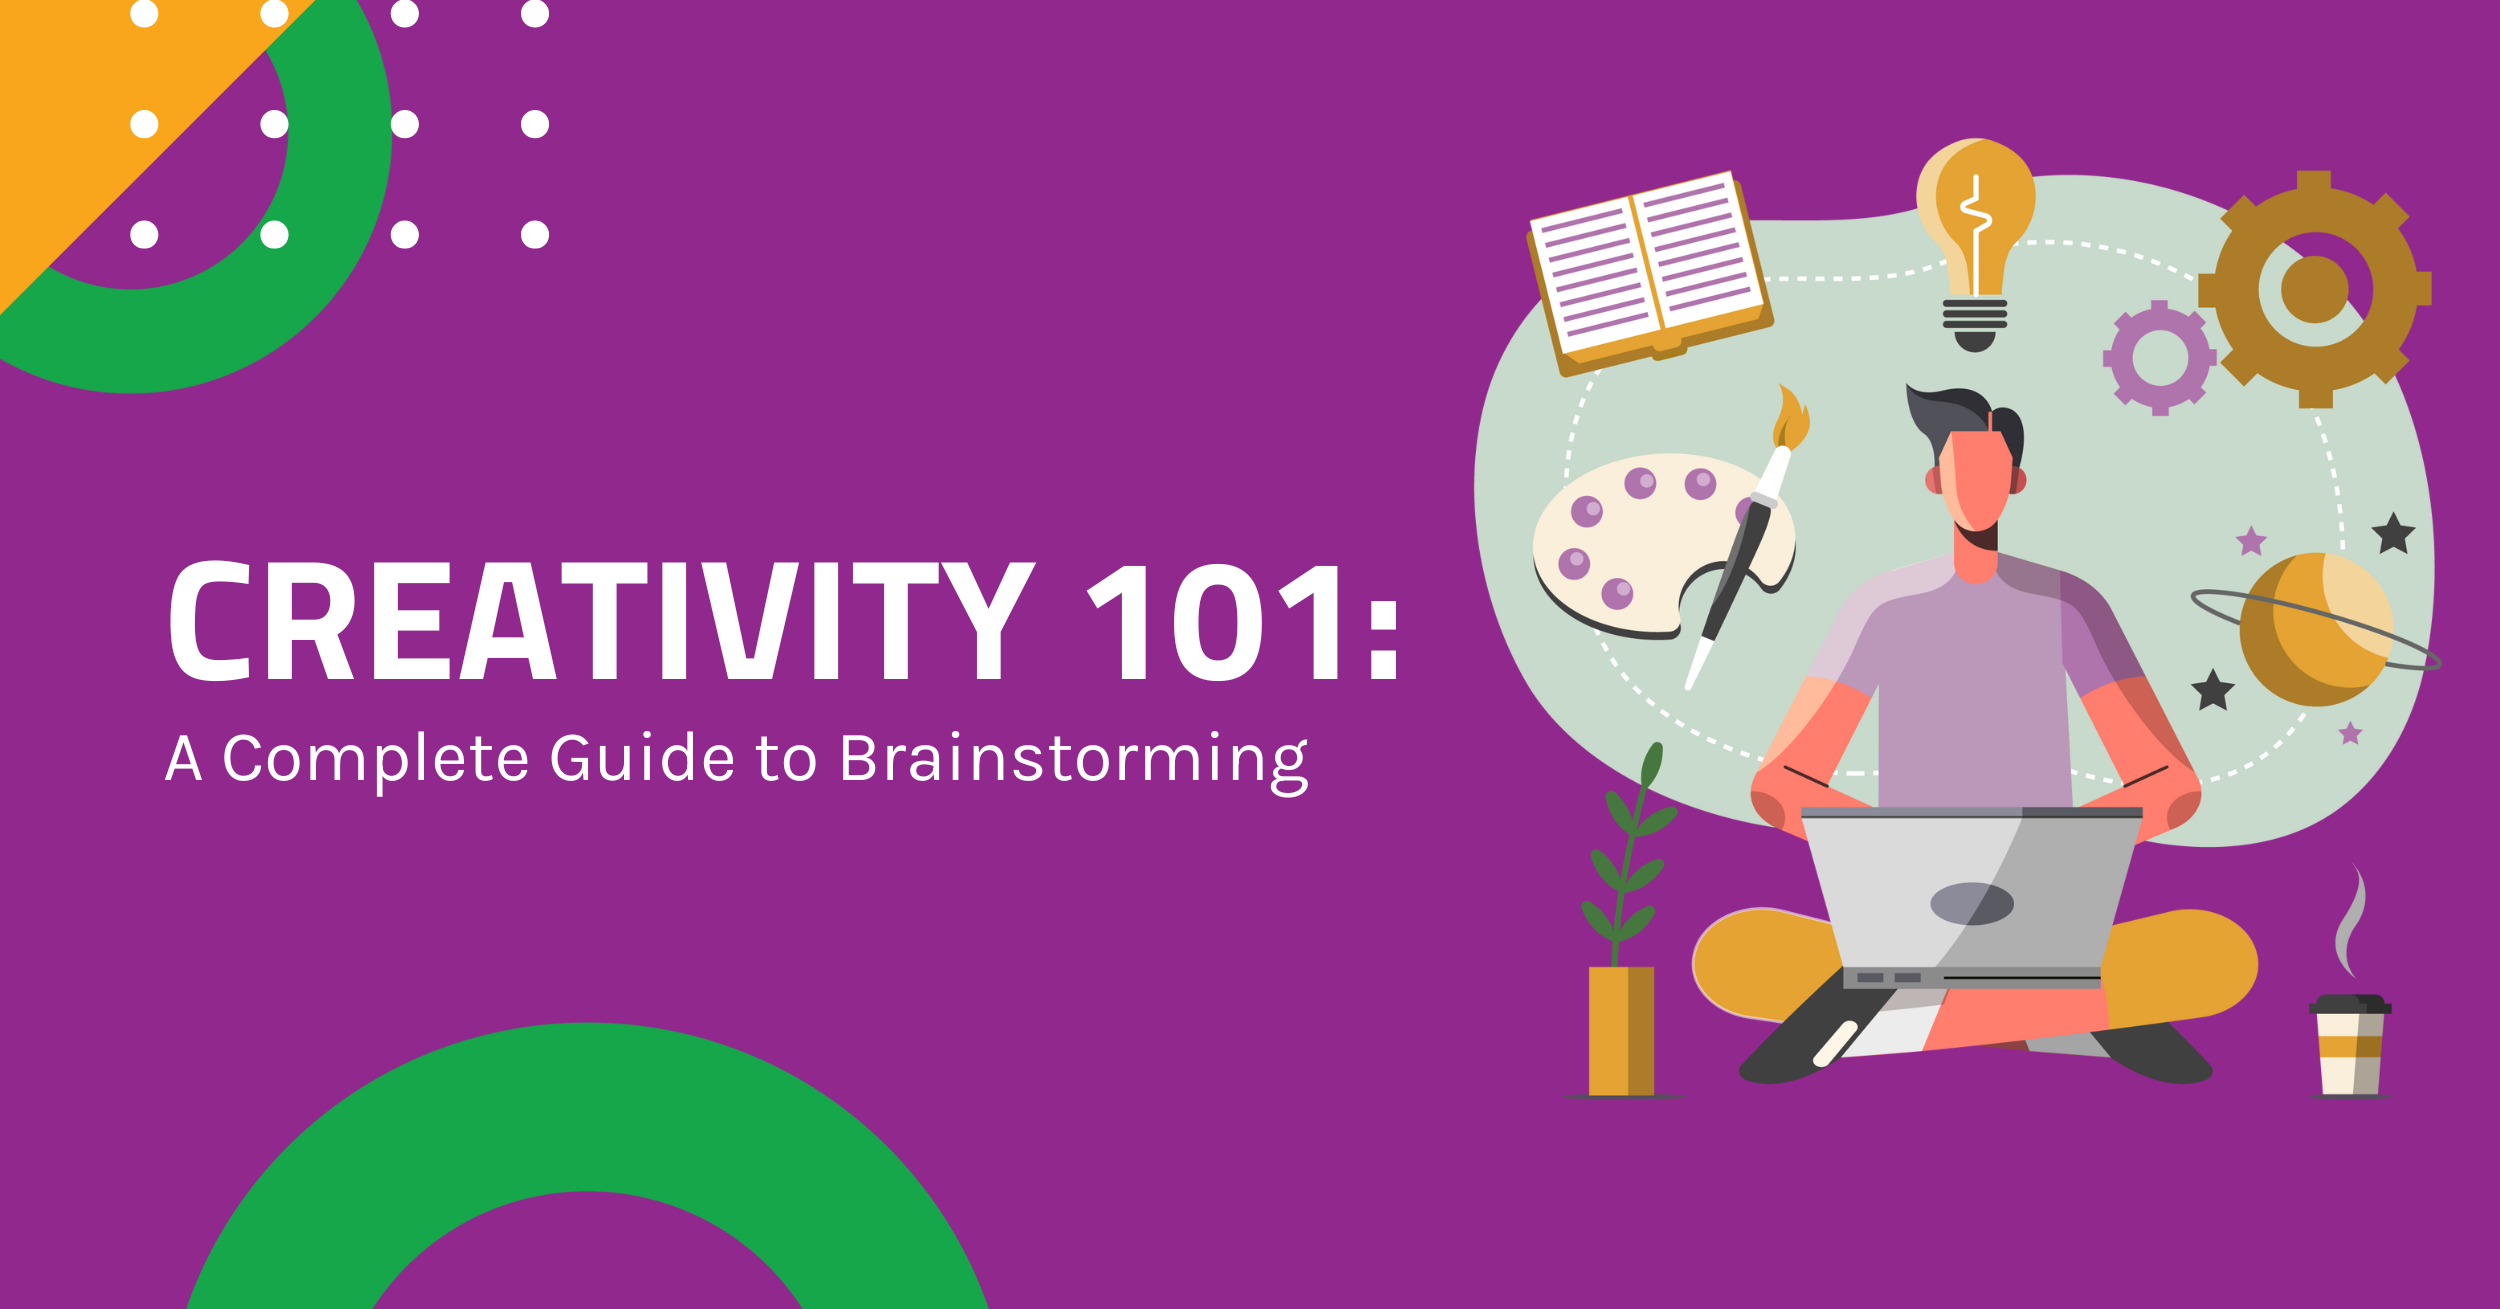 Creativity 101 - Complete Guide to Brainstorming